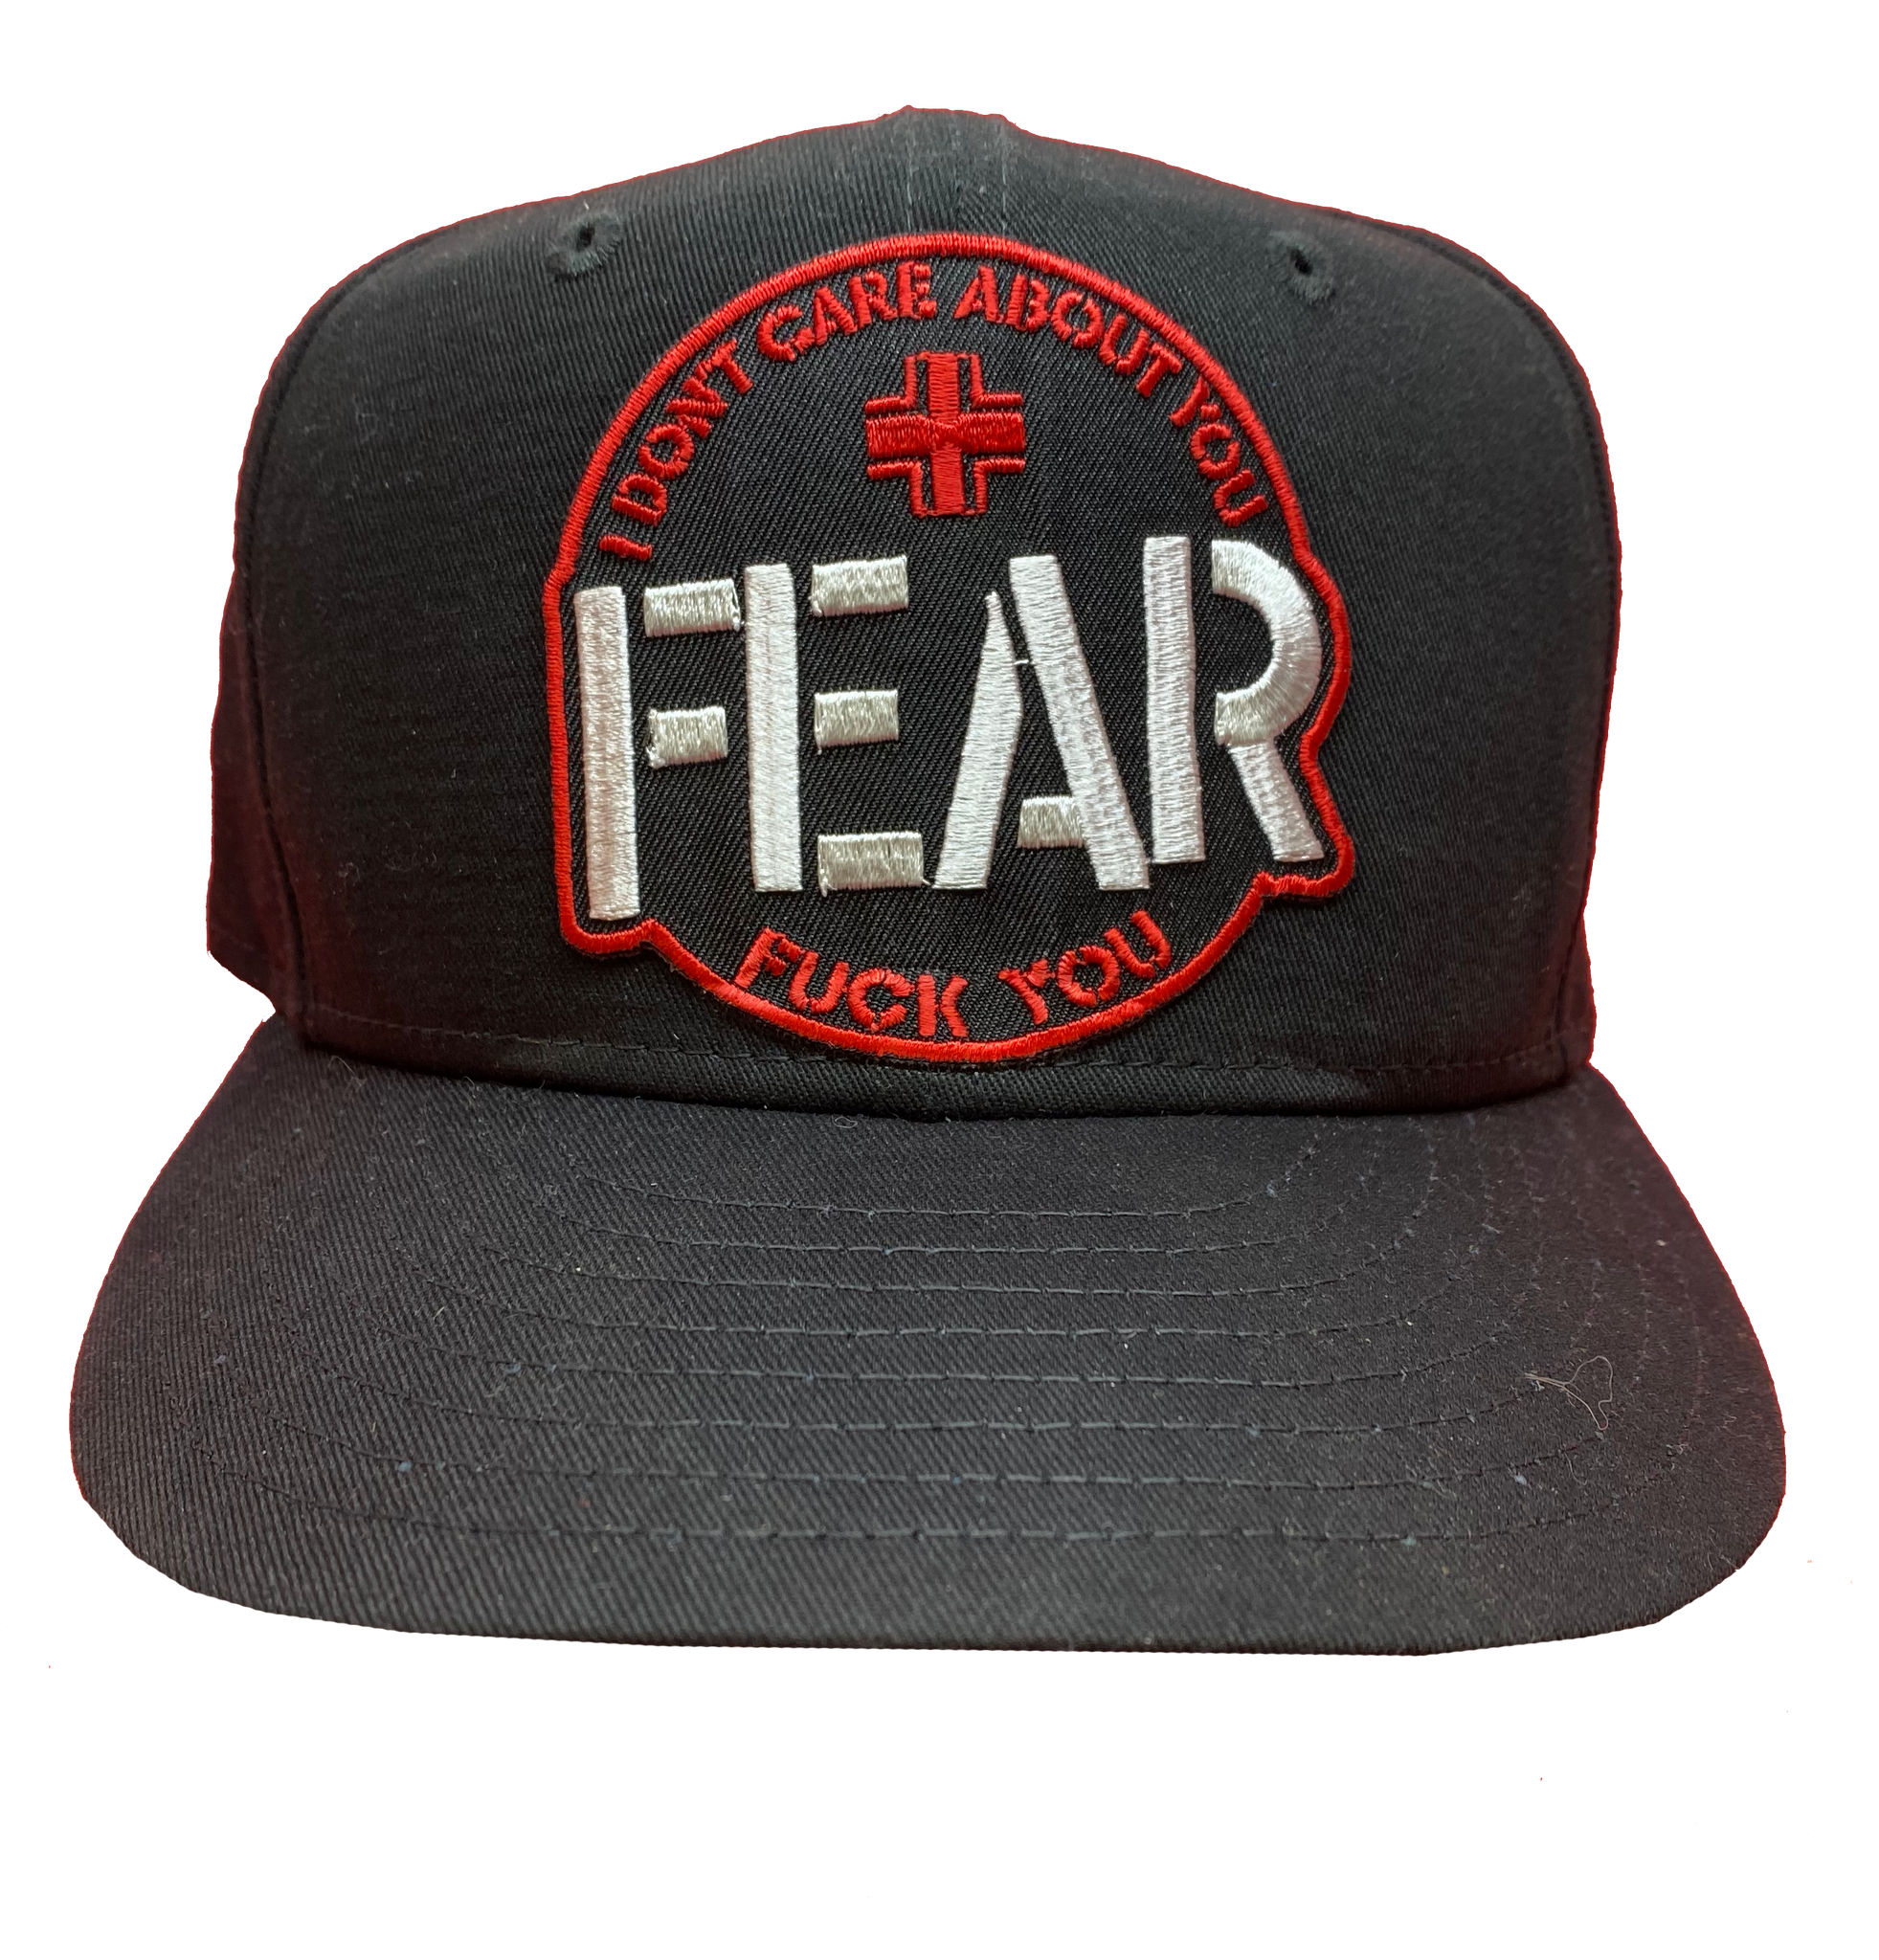 FEAR: "I DON'T CARE ABOUT YOU" EMBROIDERED MESH BACK BALLCAP